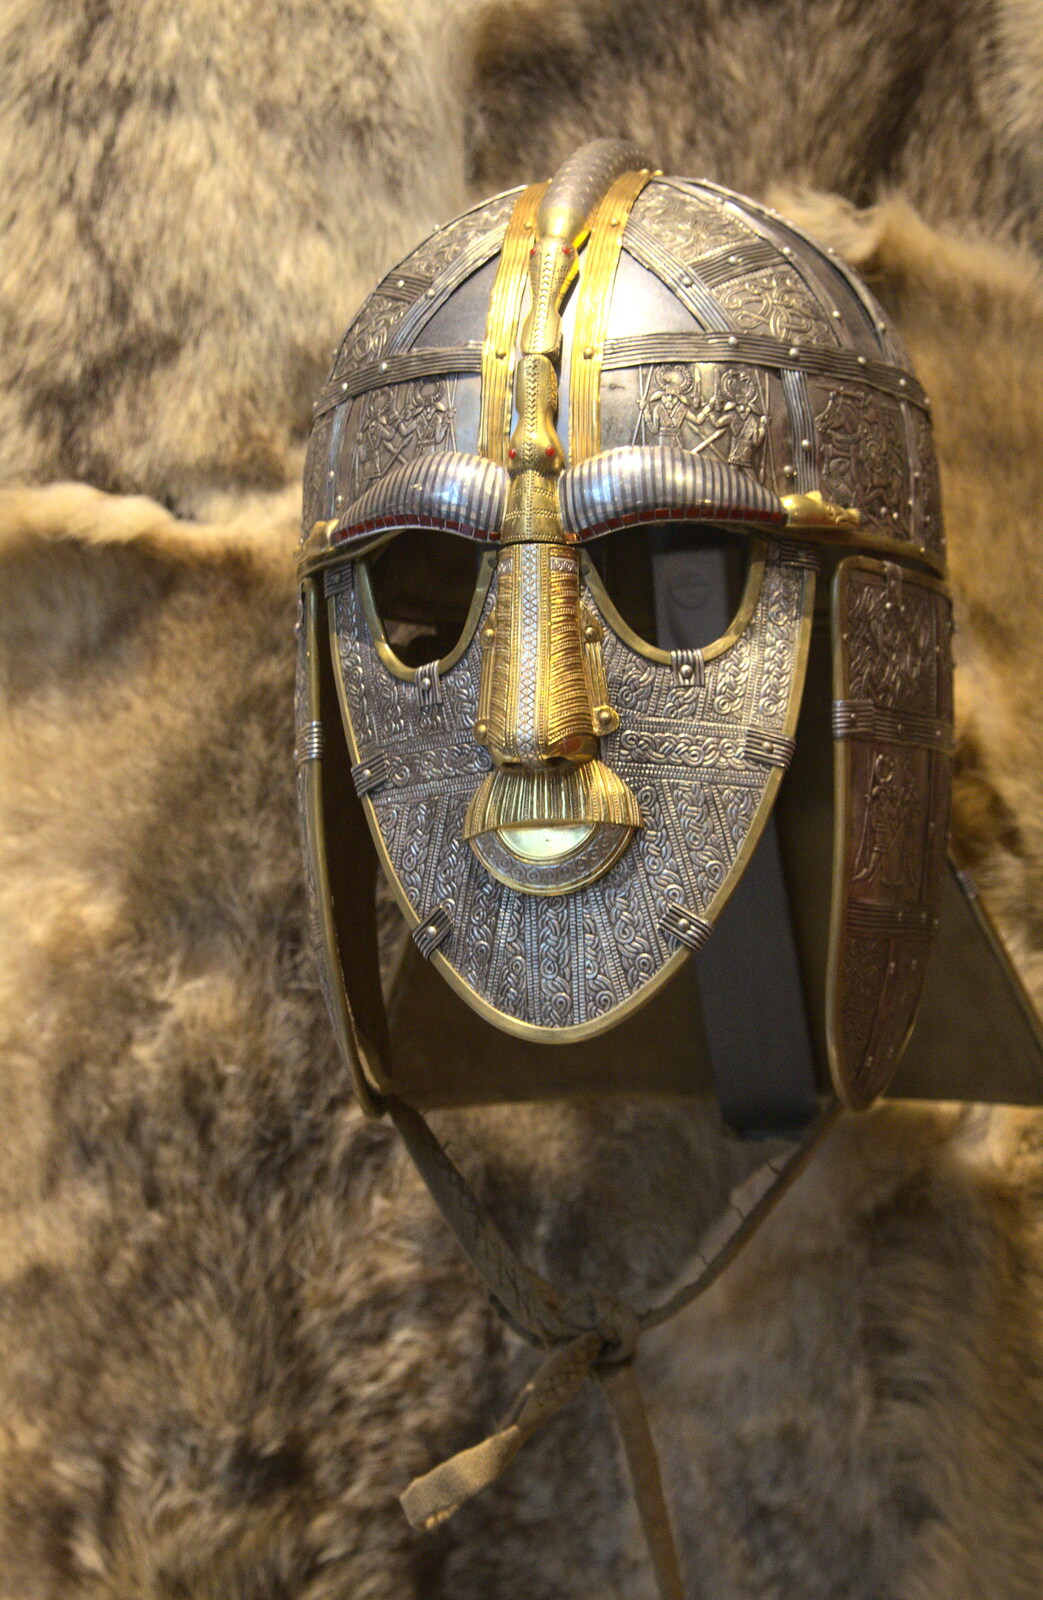 A reproduction of the famous helmet from A Trip to Sutton Hoo, Woodbridge, Suffolk - 29th January 2017